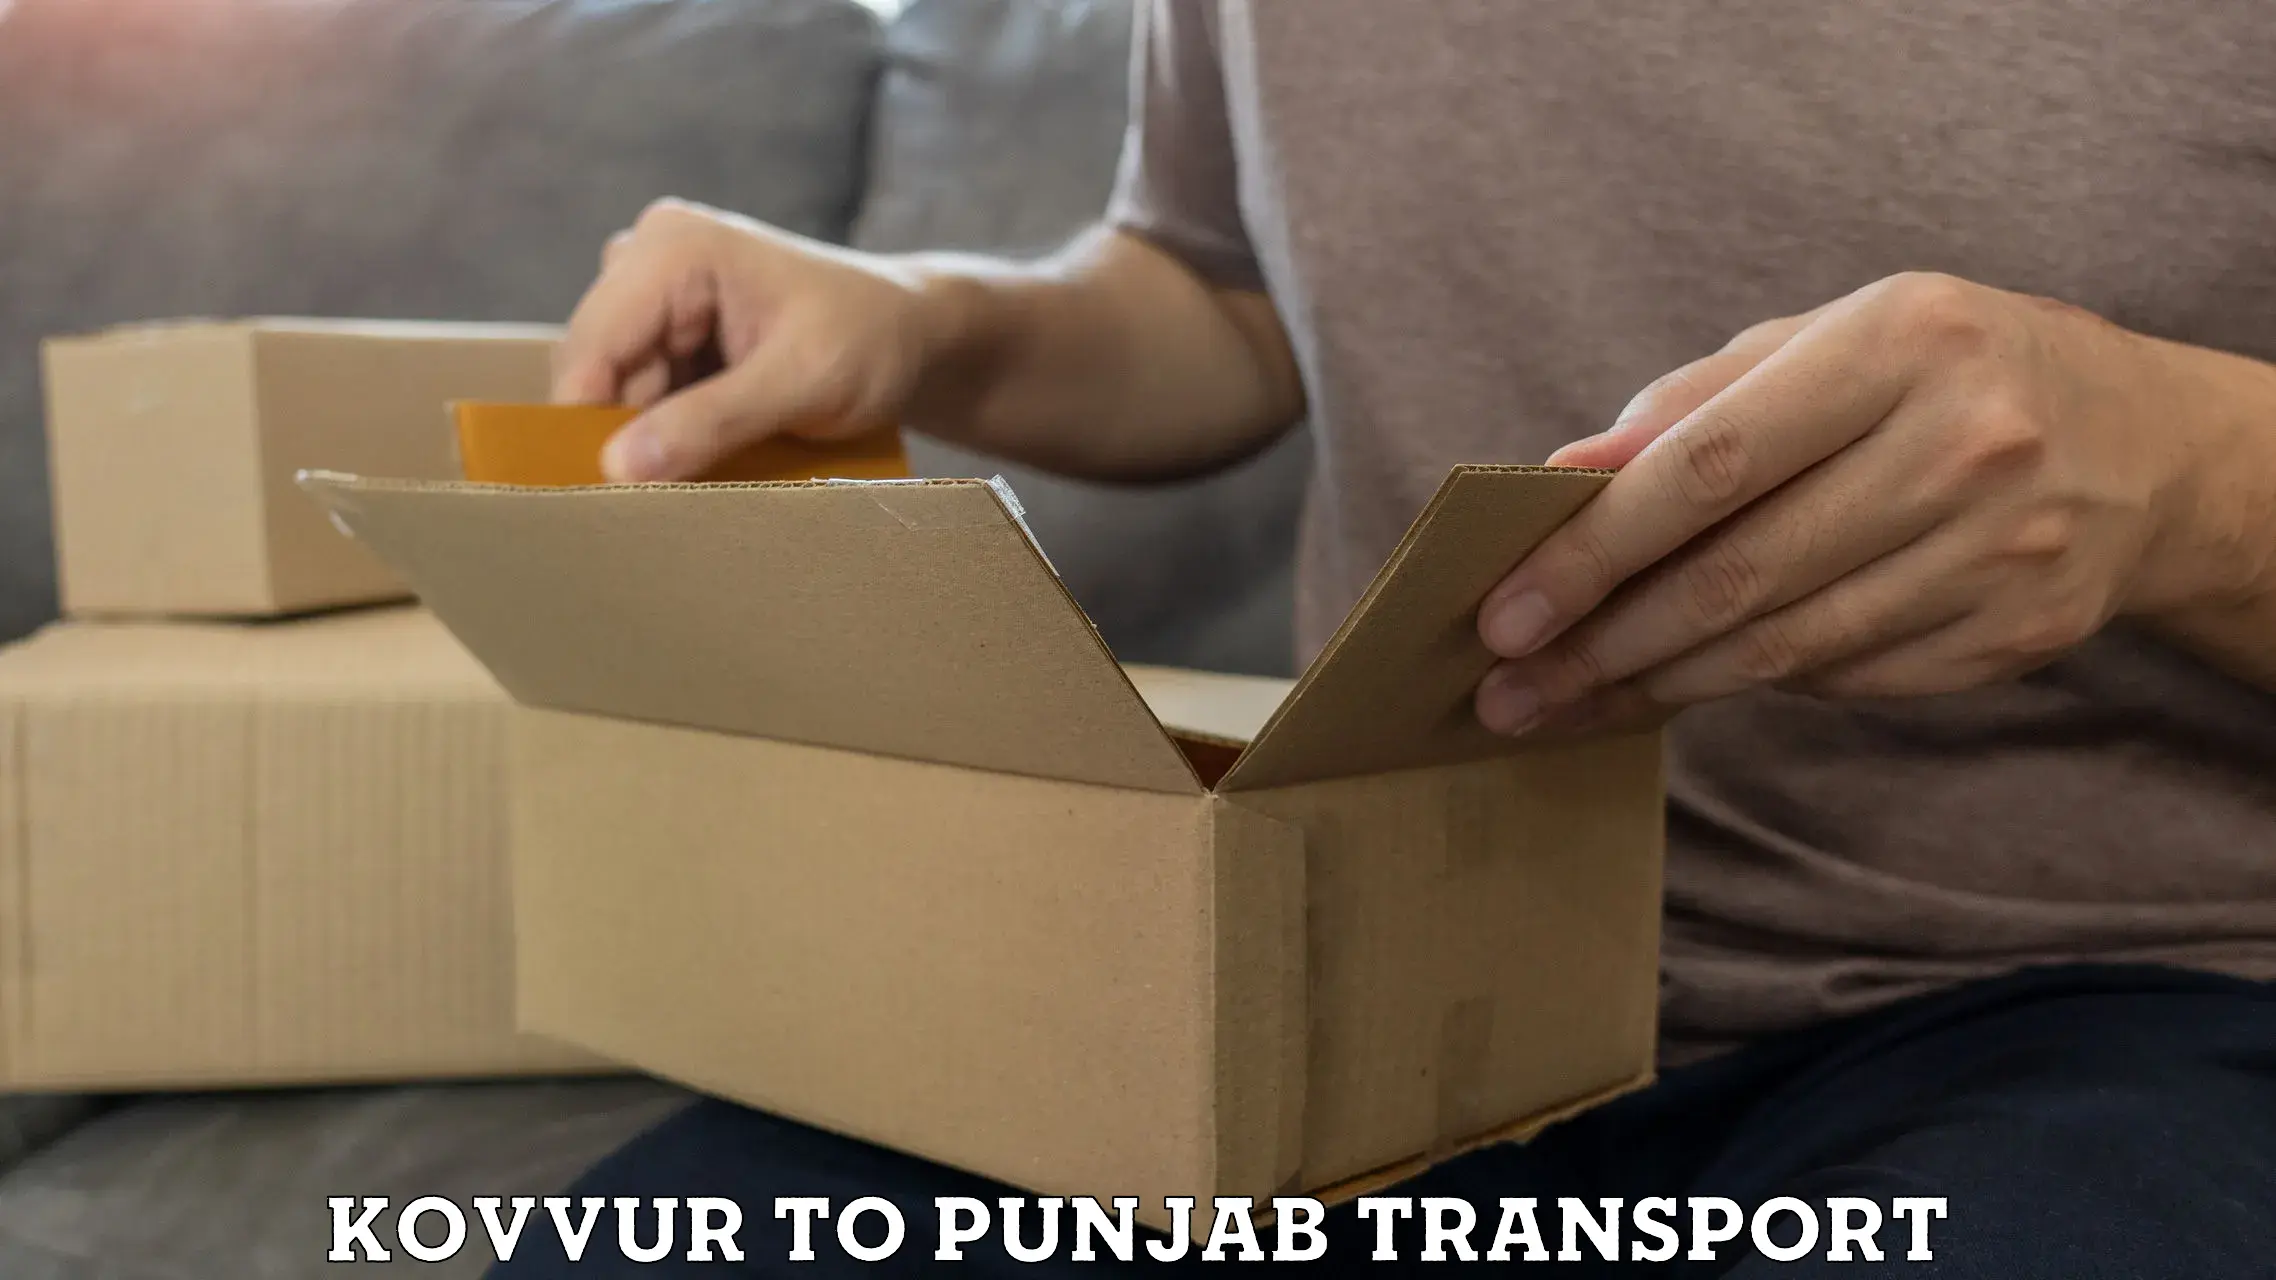 Commercial transport service Kovvur to Patiala